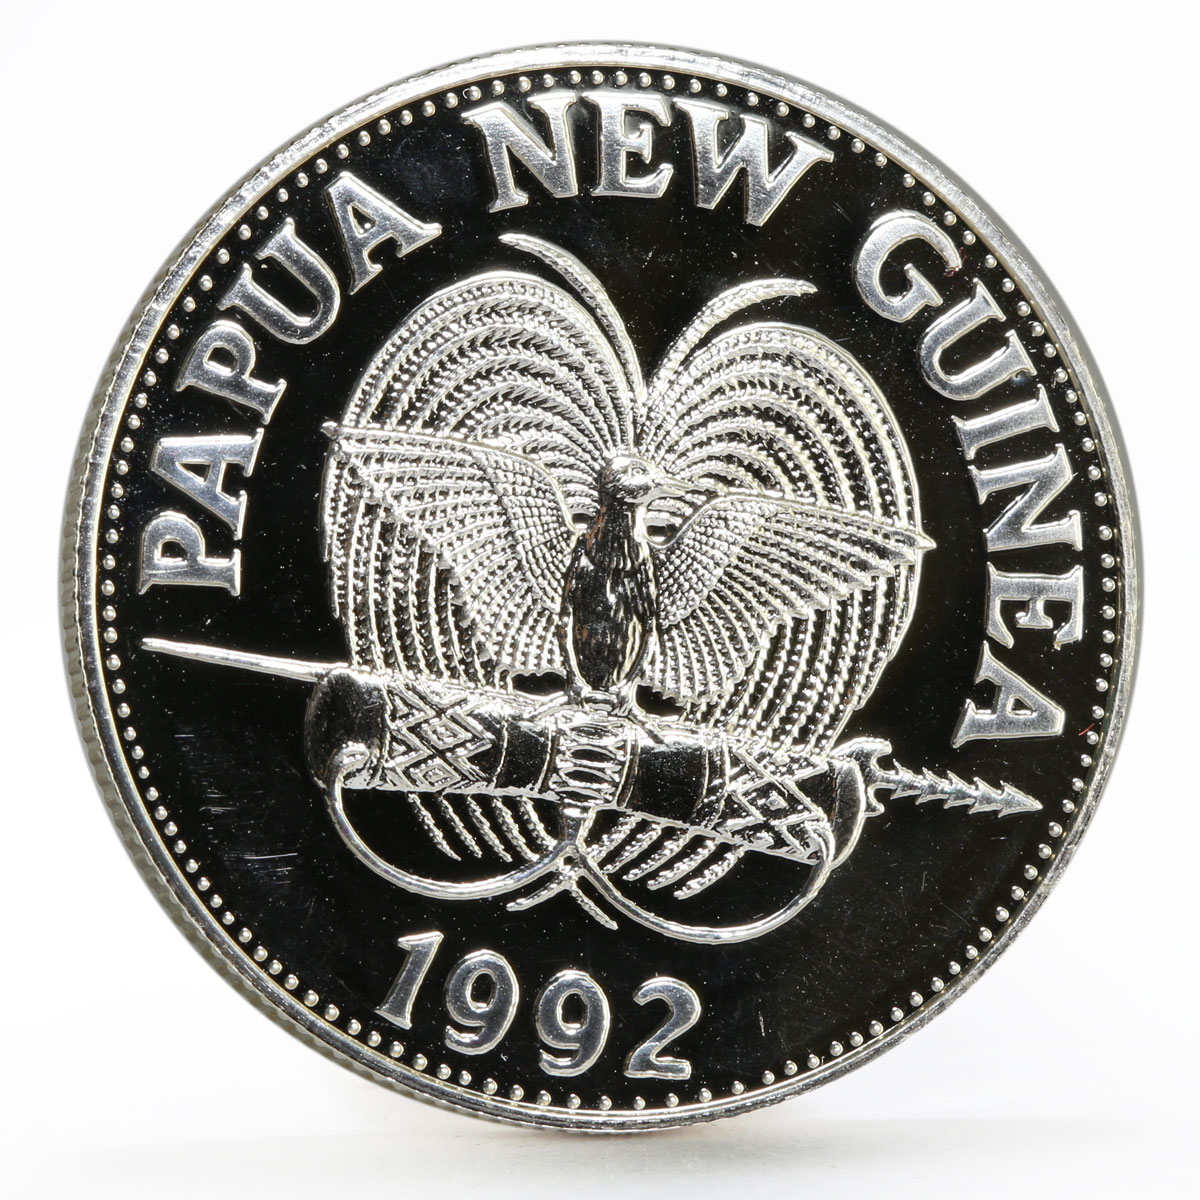 Papua New Guinea 5 kina National Emblem Queen Butterfly proof silver coin 1992